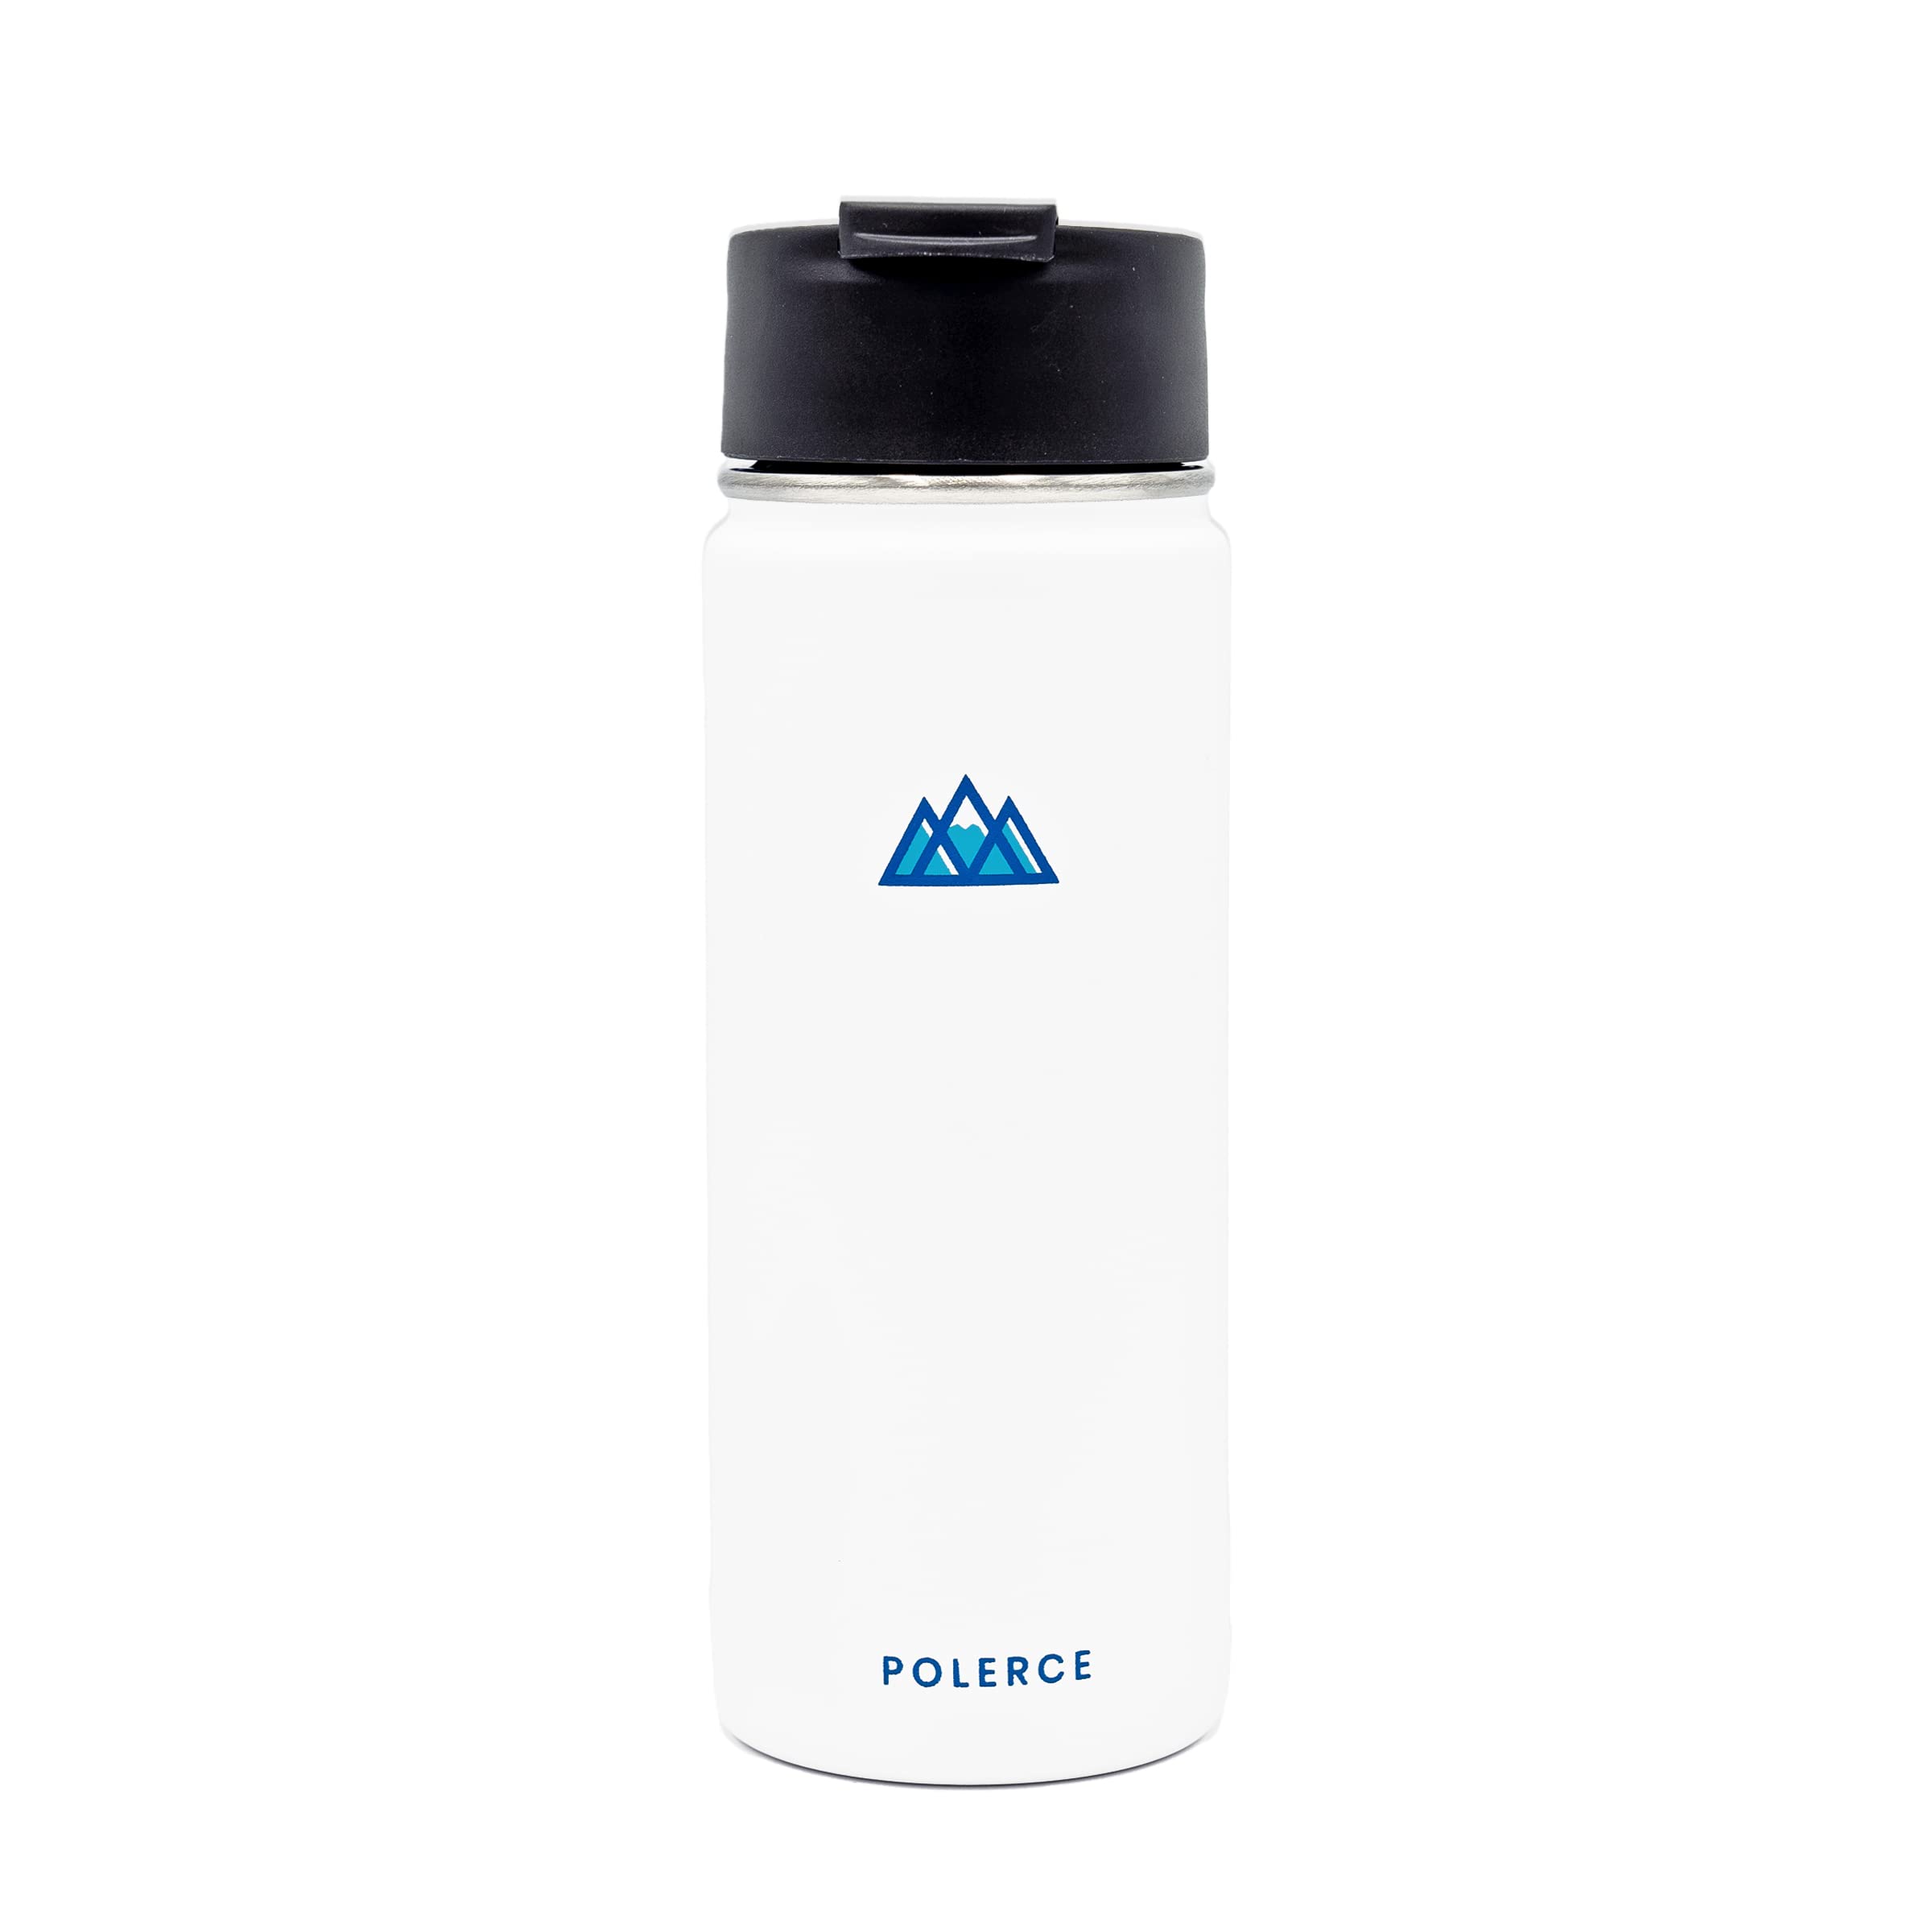 Castellanos Wide Mouth Coffee Flip Lid by Polerce (Black) - Compatible with All Wide Mouth Bottles (Hydroflask, Yeti, etc) - BPA-Free - Leak-Proof